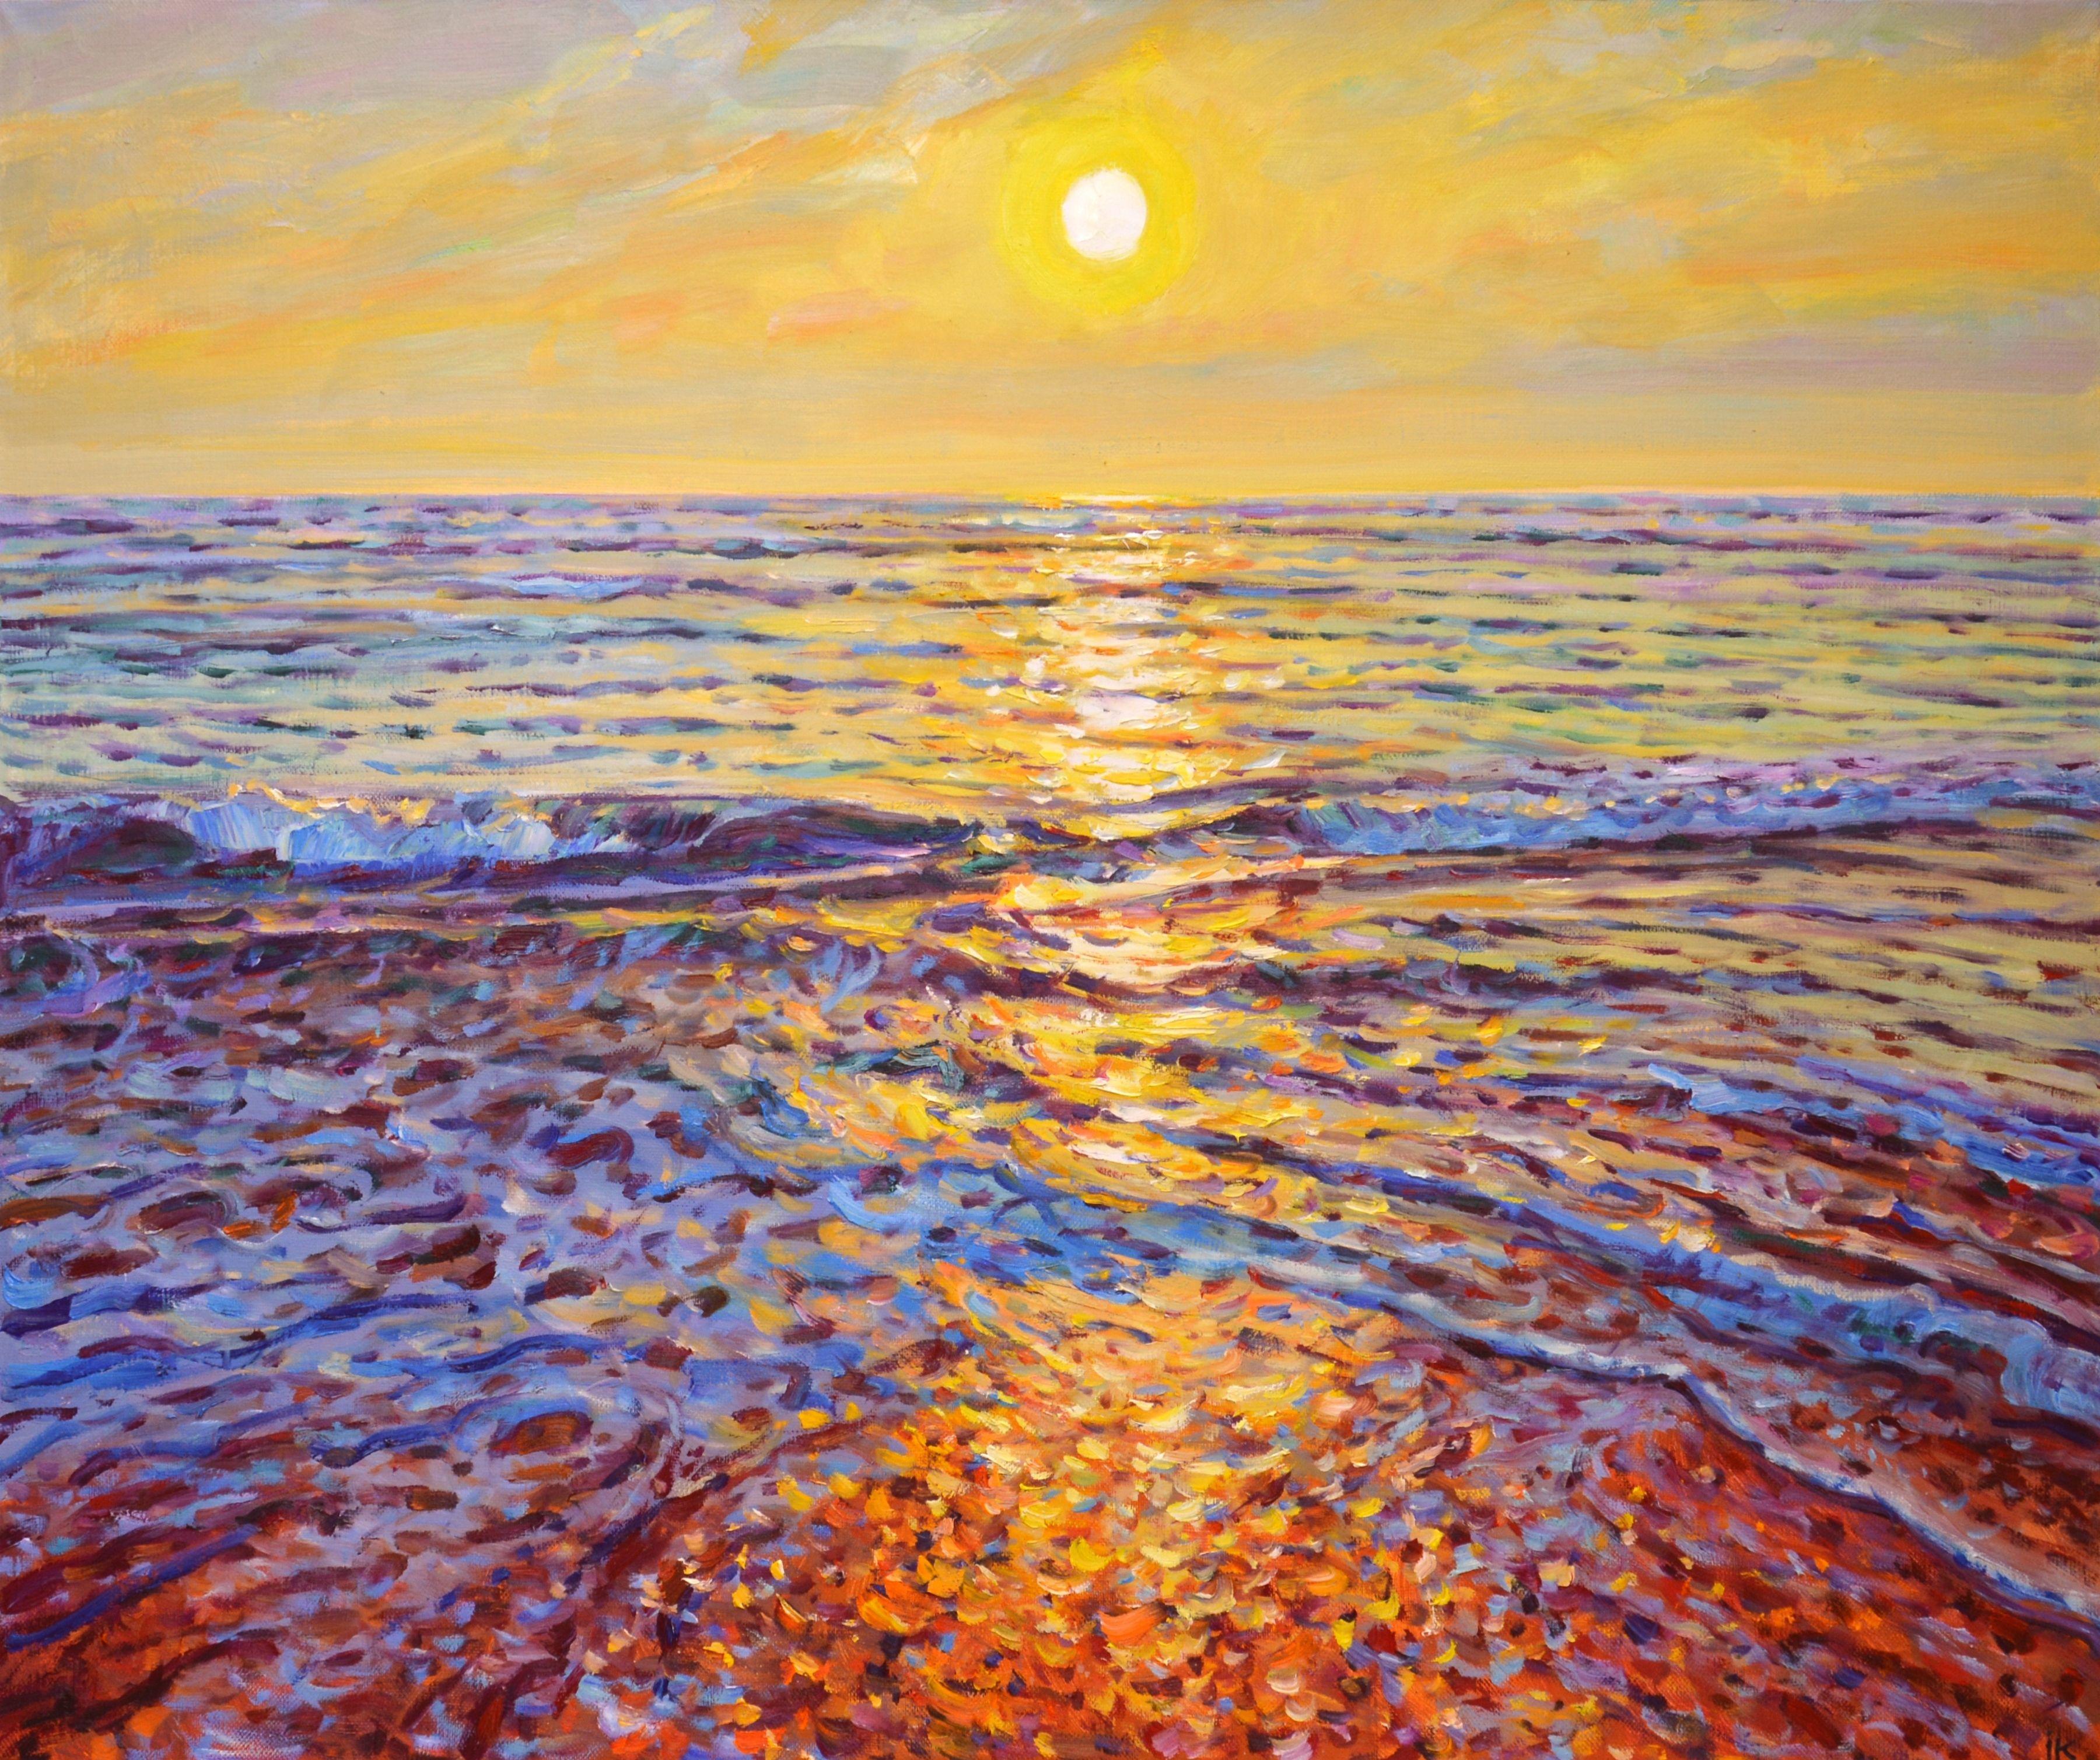 Sea sunset, light waves, reflection of the sun in water, glare on warm sand and pieces of amber. Oil painting on linen canvas, in the style of impressionism. It is varnished. Ready for suspension. :: Painting :: Impressionist :: This piece comes